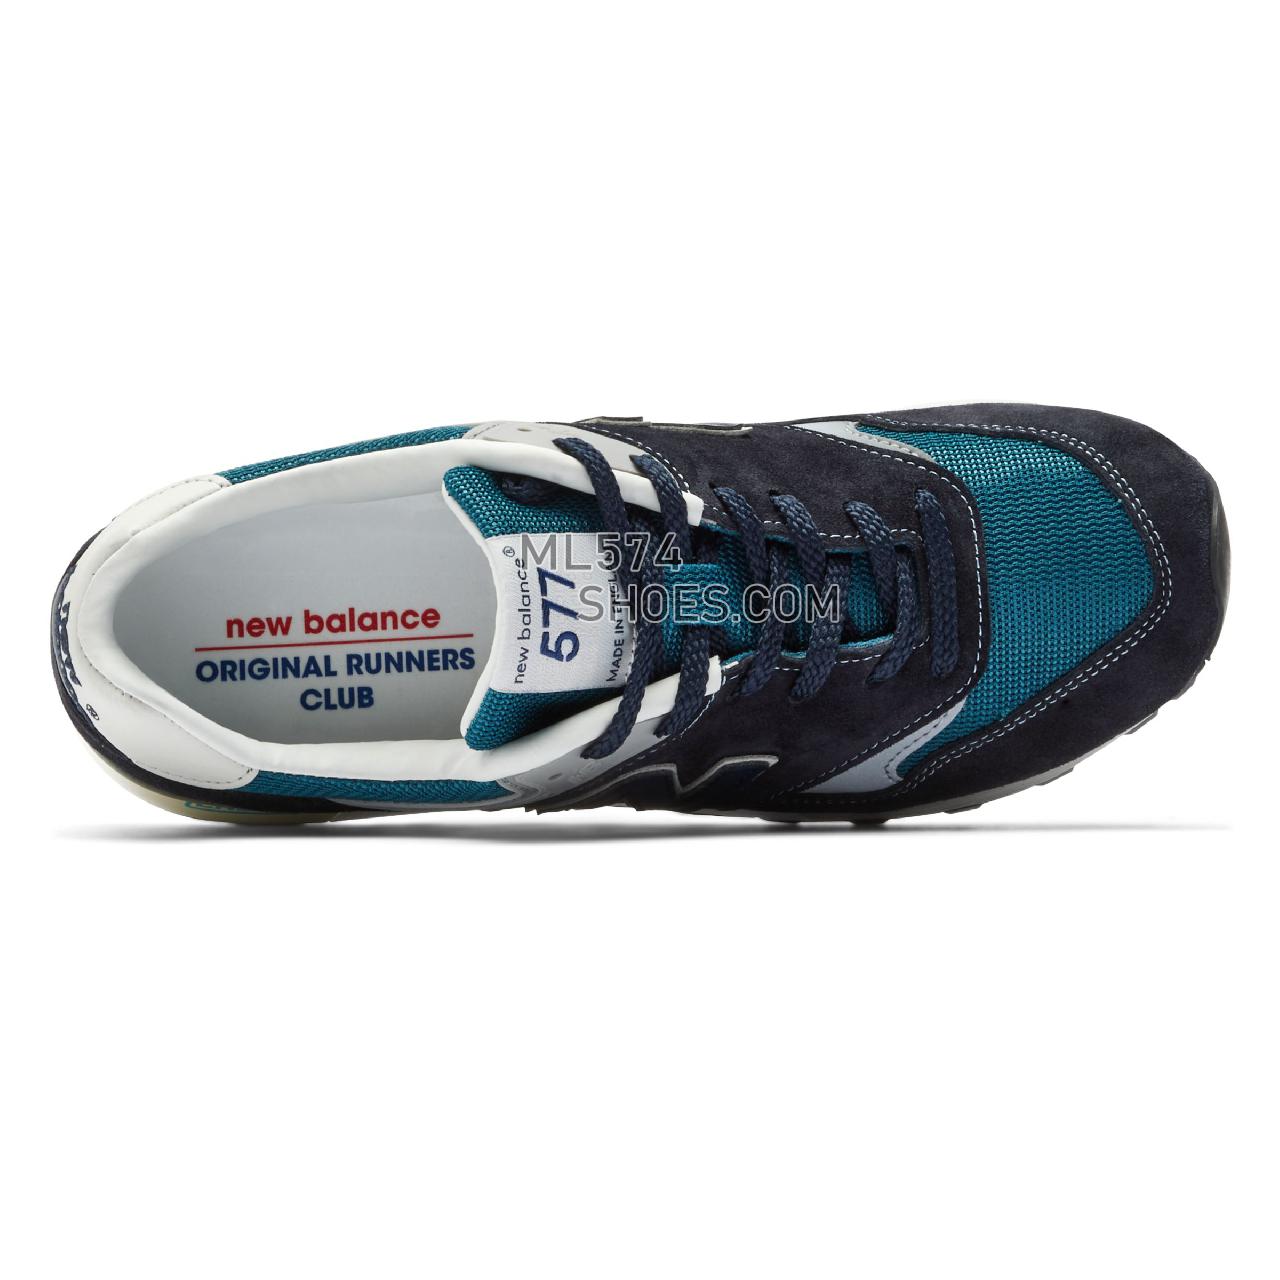 New Balance Made in UK 577 - Men's Made in USA And UK Sneakers - Navy with Grey - M577ORC